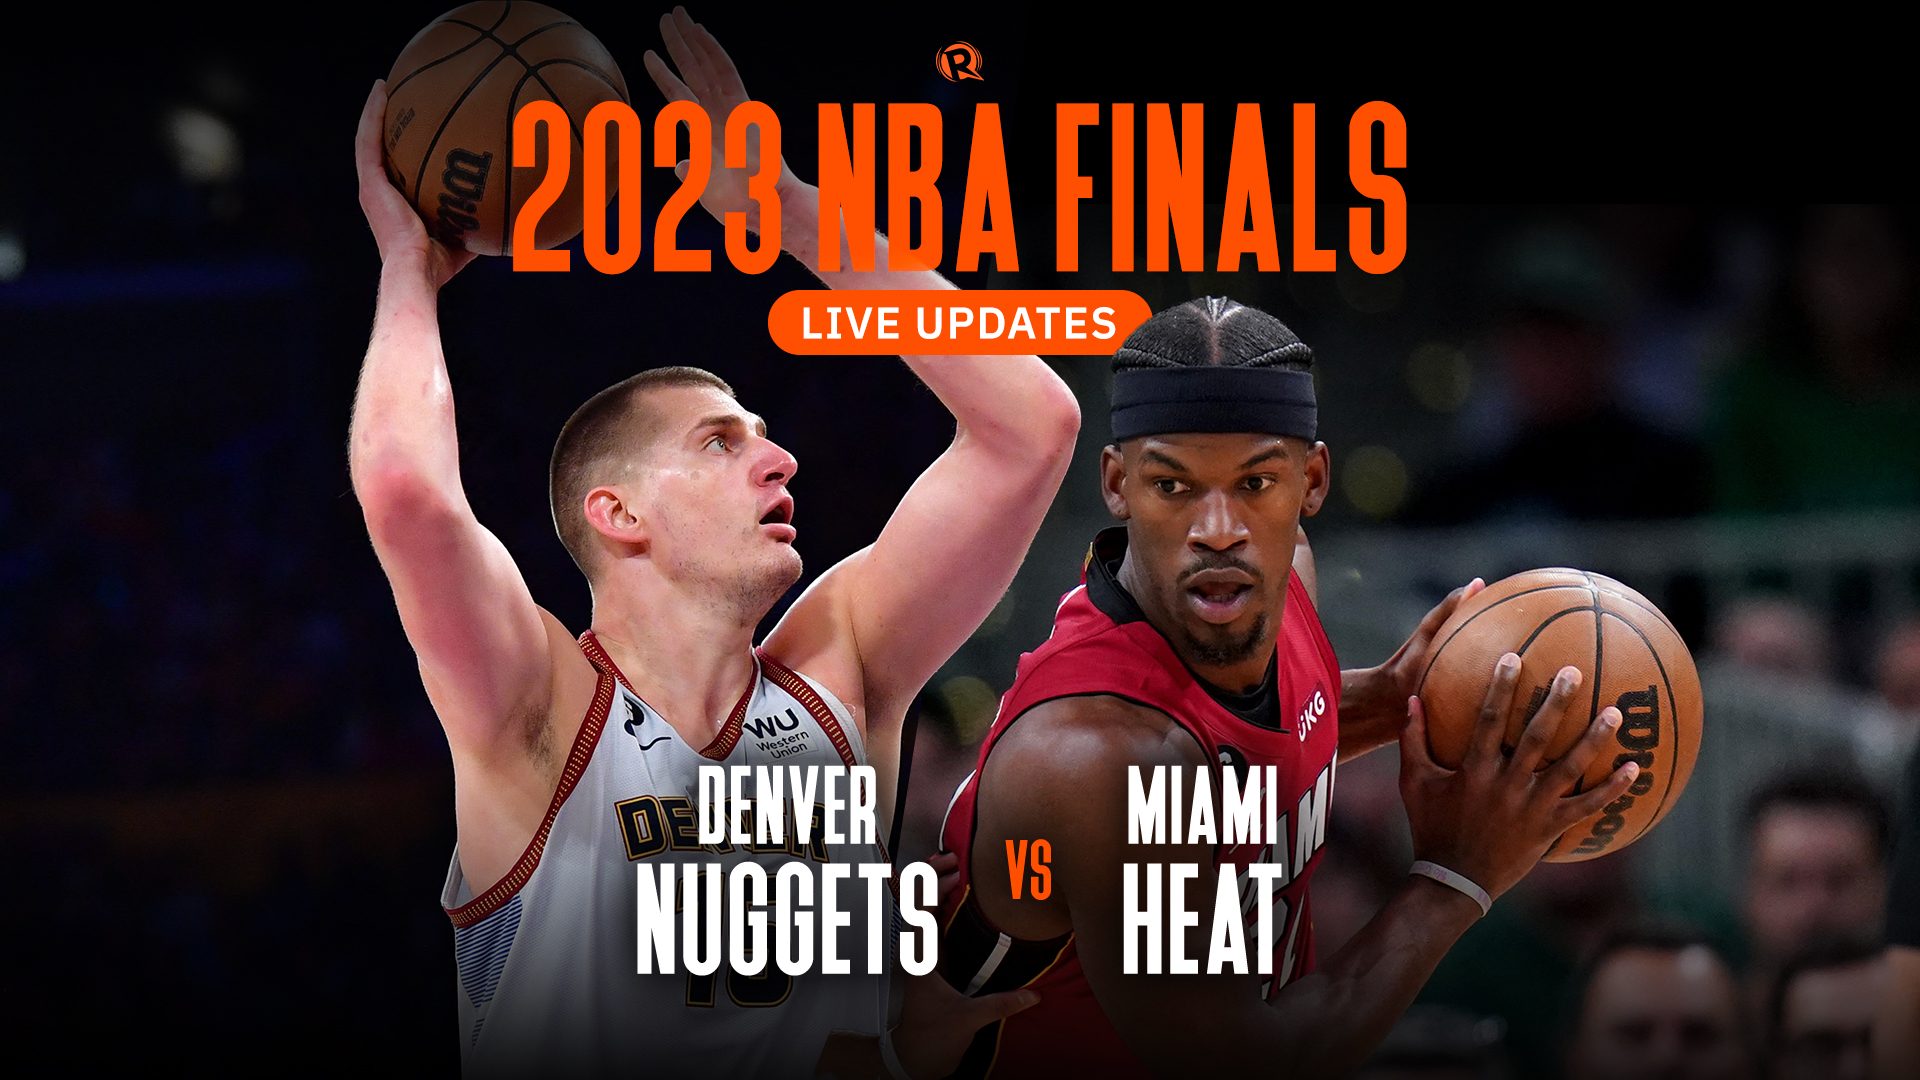 How to Watch the 2023 NBA Finals - Miami Heat vs. Denver Nuggets